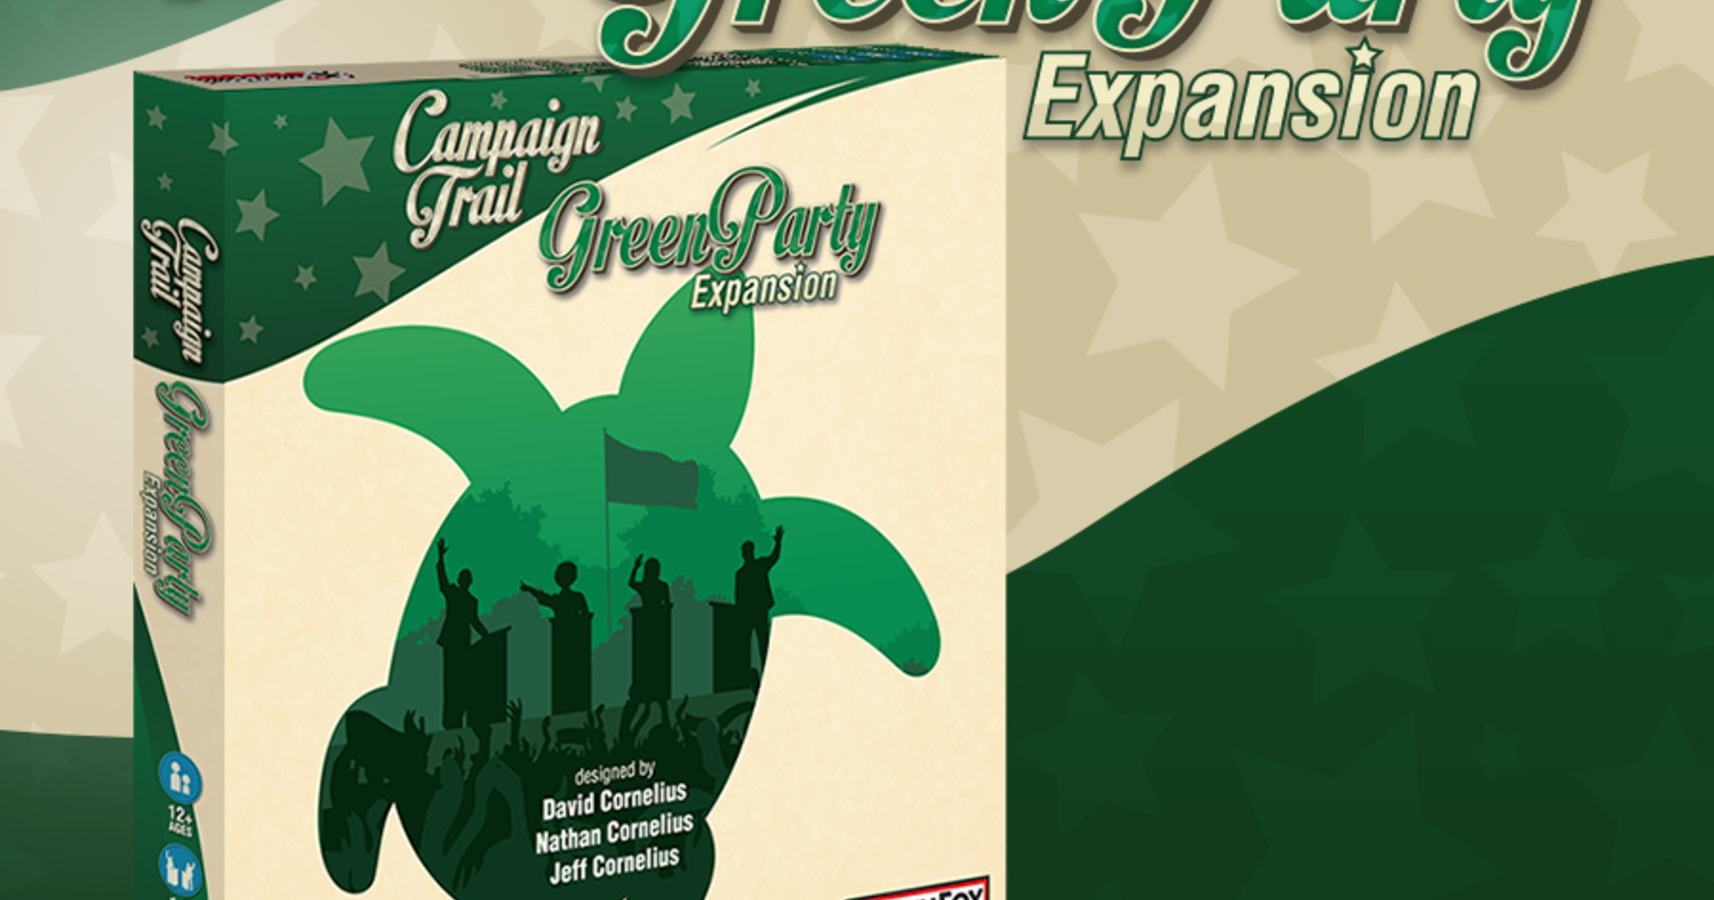 campaign-trail-second-edition-and-green-party-expansion-by-grey-fox